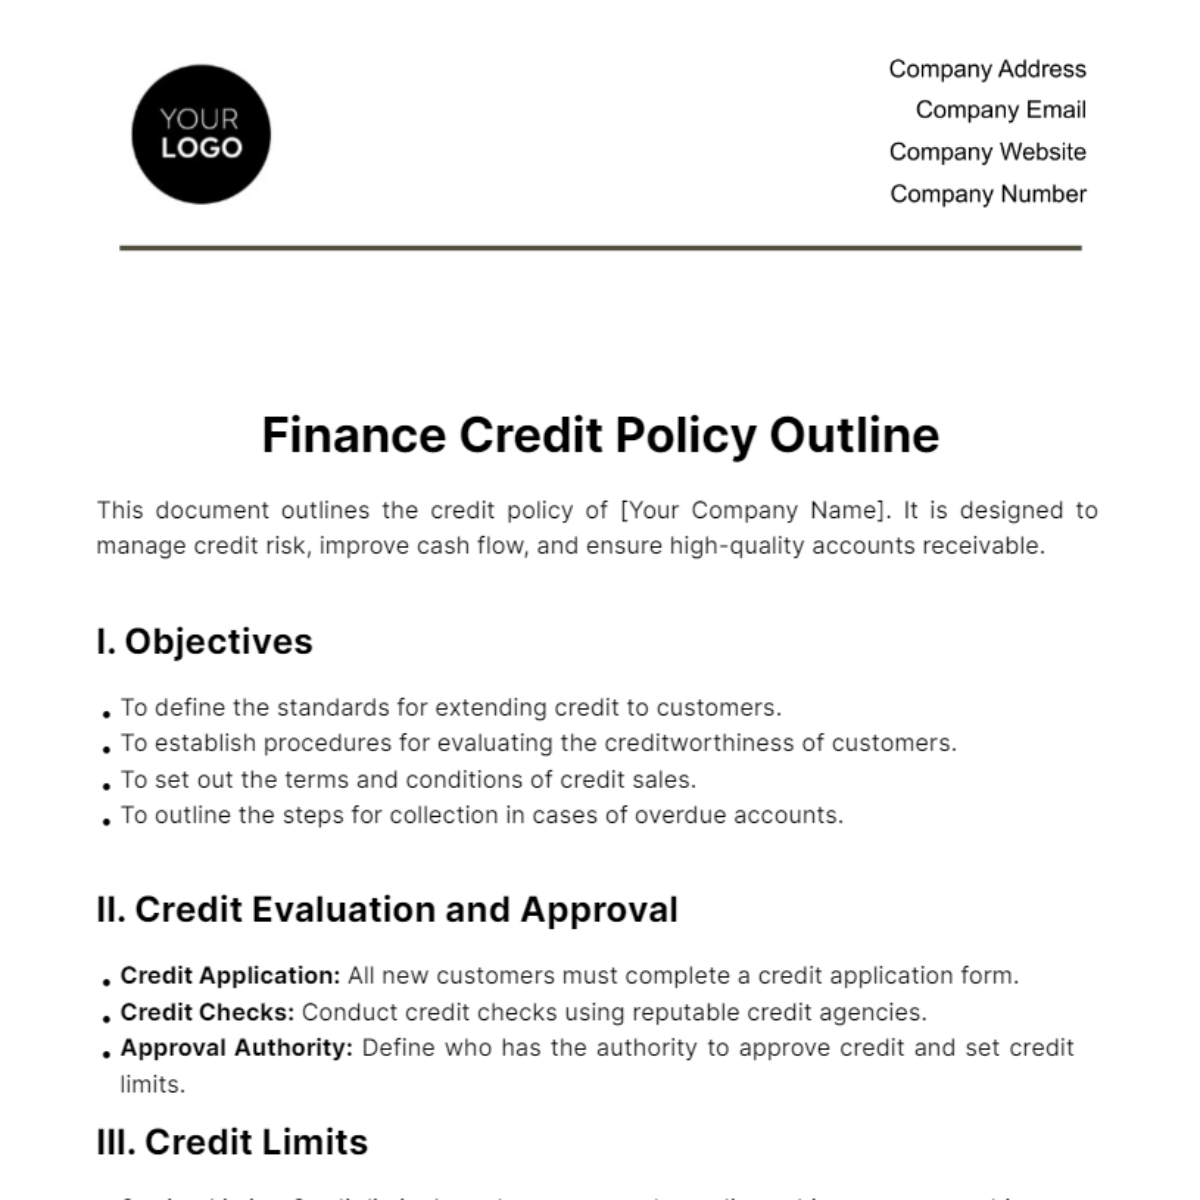 Free Finance Credit Policy Outline Template